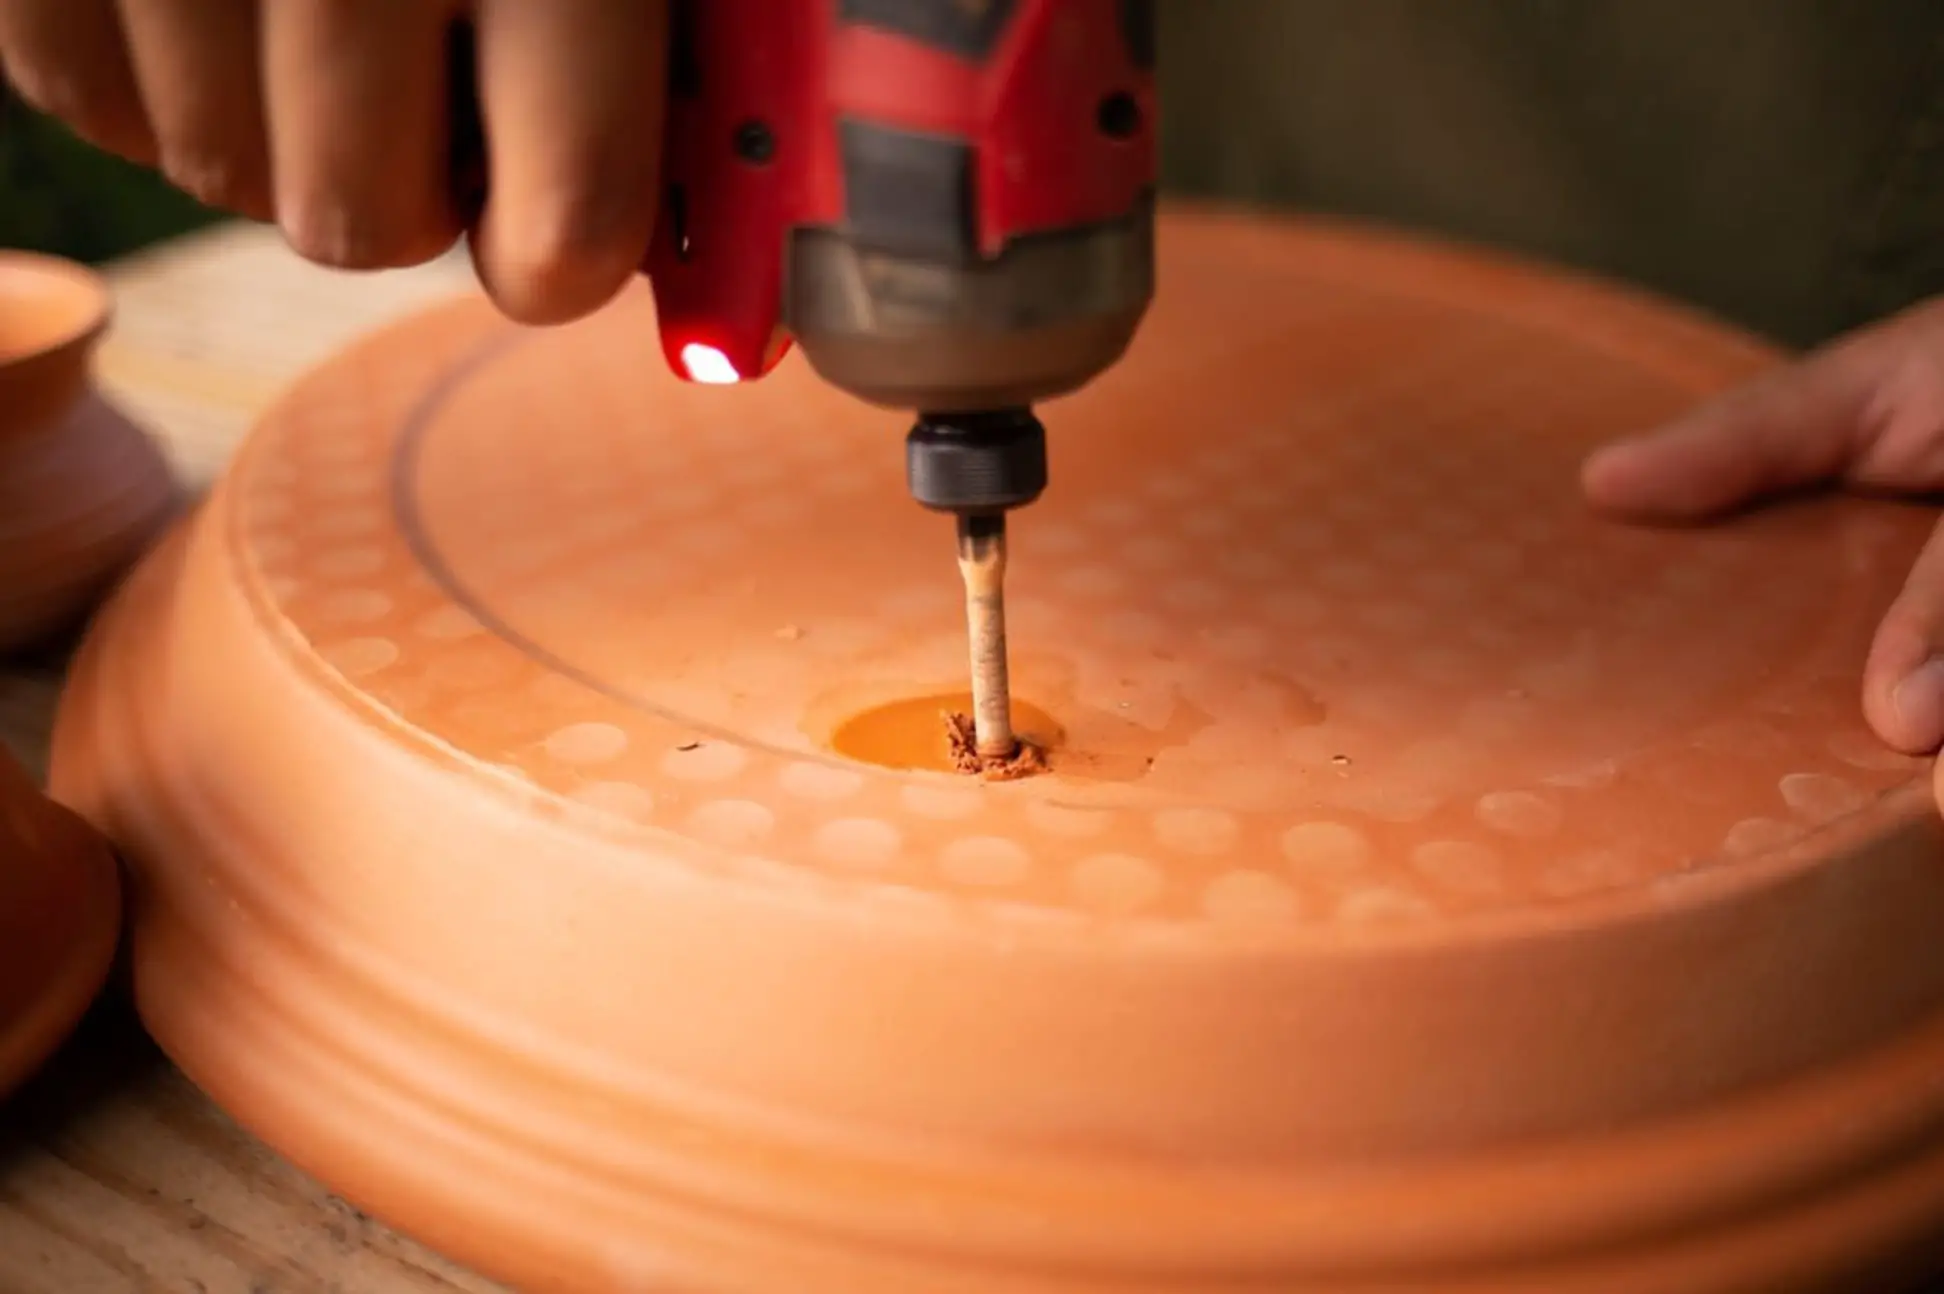 How To Drill A Hole In A Ceramic Pot?